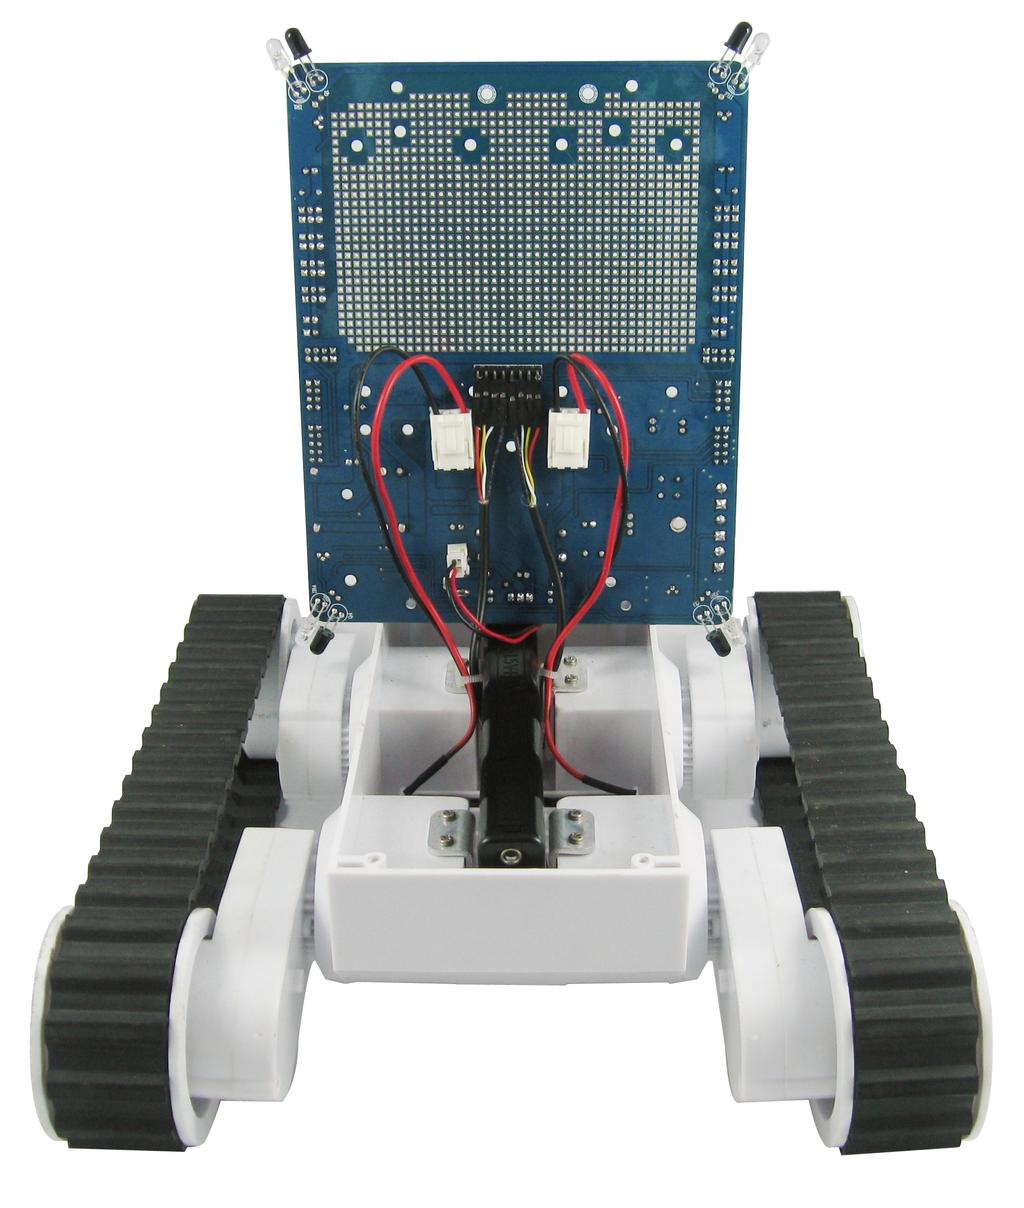 Connection to Rover 5 Start by Installing rechargeable NiMh or NiCd batteries in the Rover 5 chassis. They can be recharged overnight by the built in trickle charge circuitry.